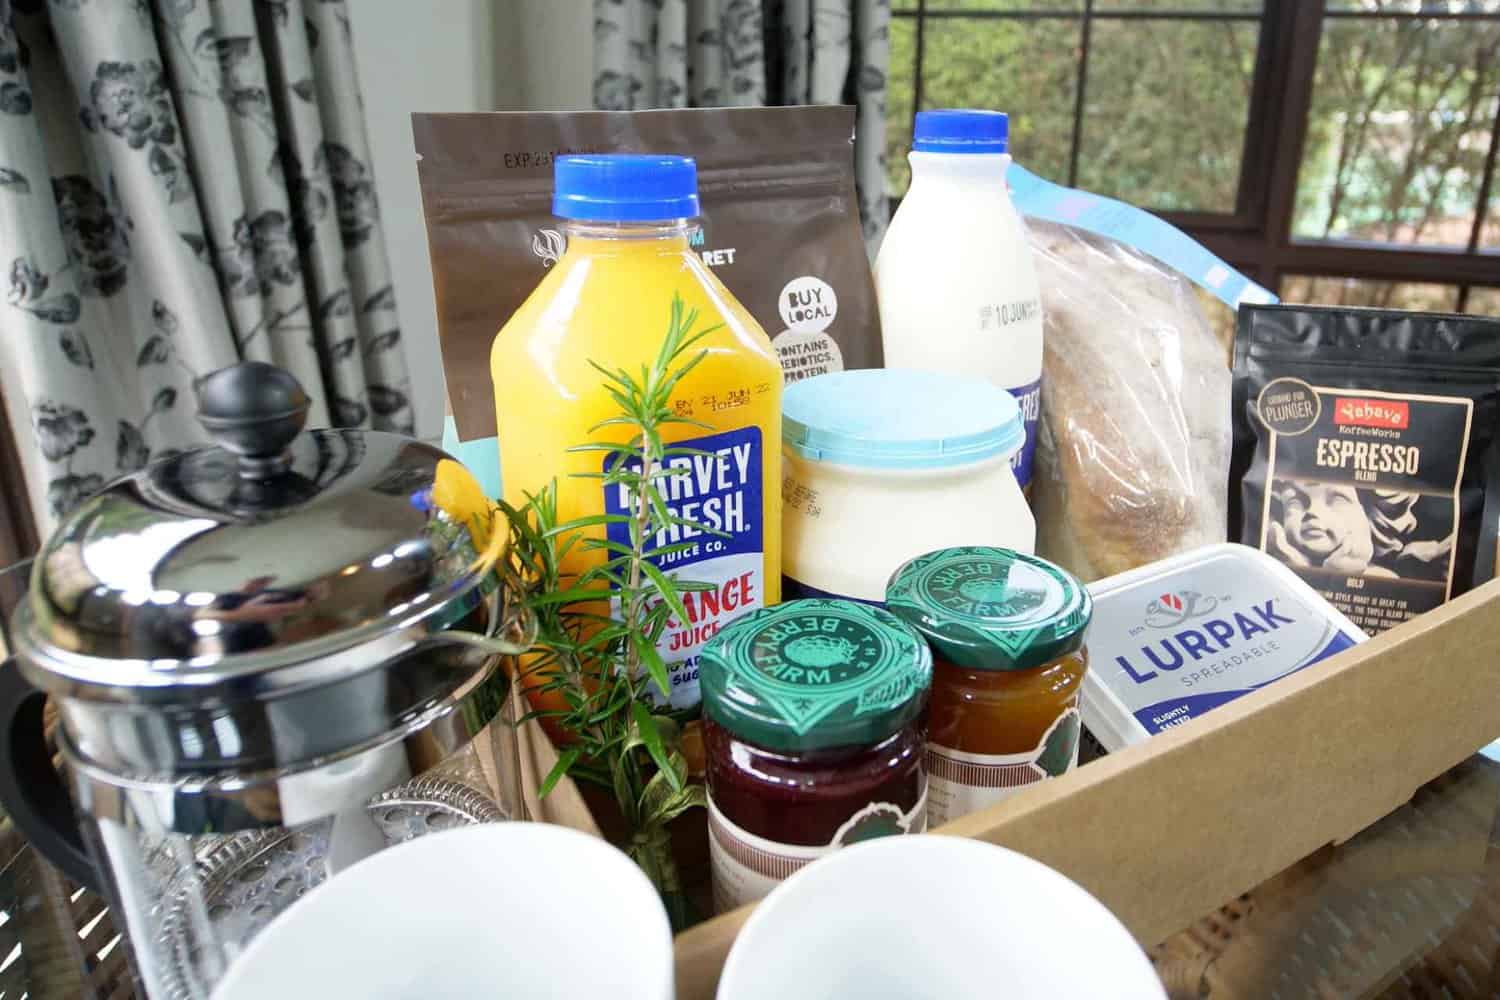 A delicious in-room breakfast spread featuring local Margaret River goods such as orange juice, coffee, yogurt, jams, butter, and more, showcasing the difference between hotel and restaurant experiences by offering personalized dining in a comfortable hotel room setting.